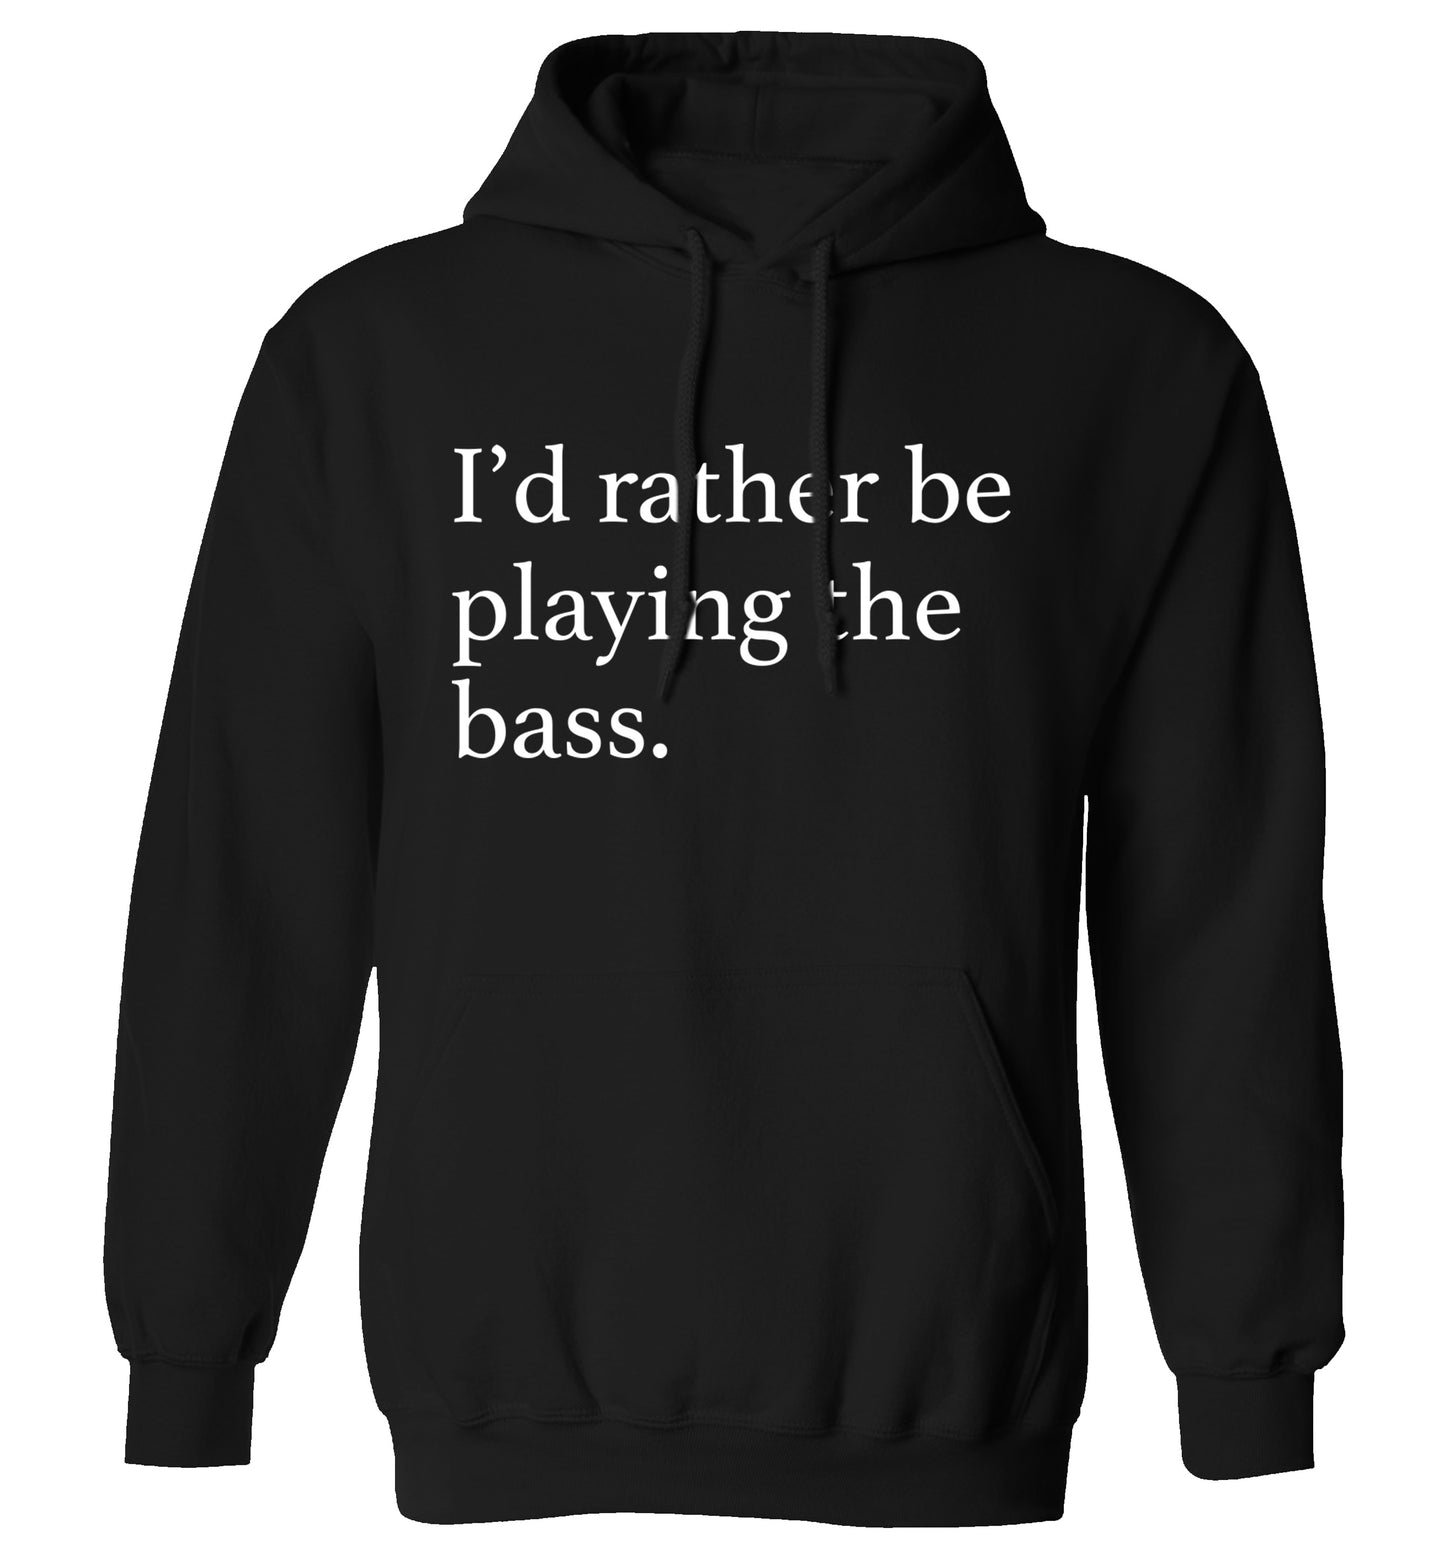 I'd rather by playing the bass adults unisex black hoodie 2XL